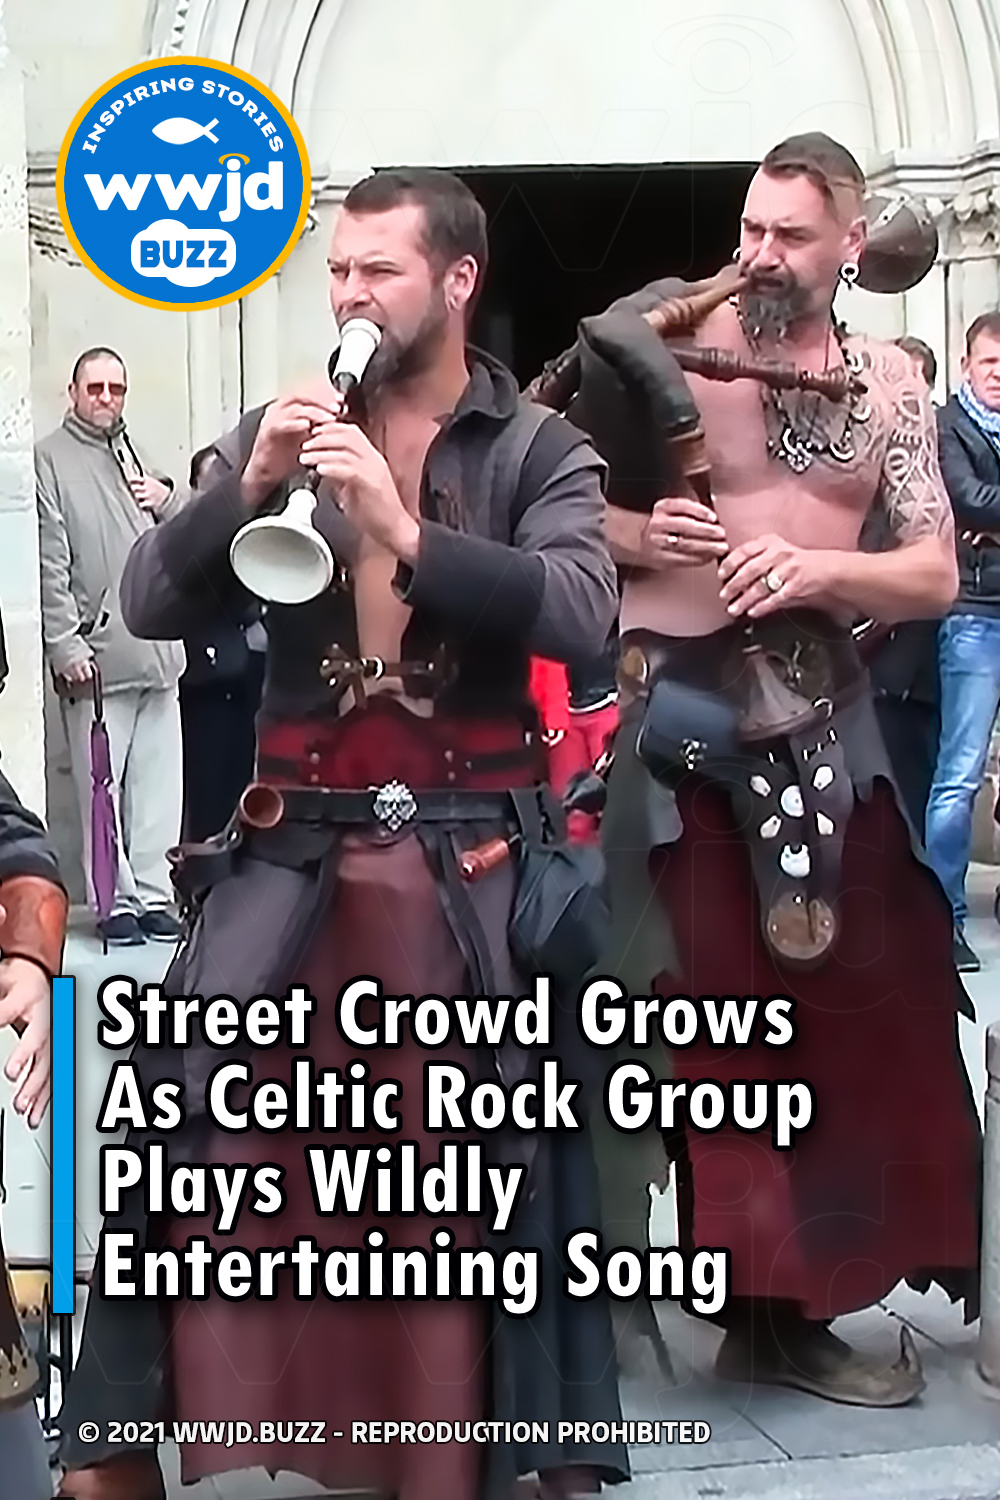 Street Crowd Grows As Celtic Rock Group Plays Wildly Entertaining Song